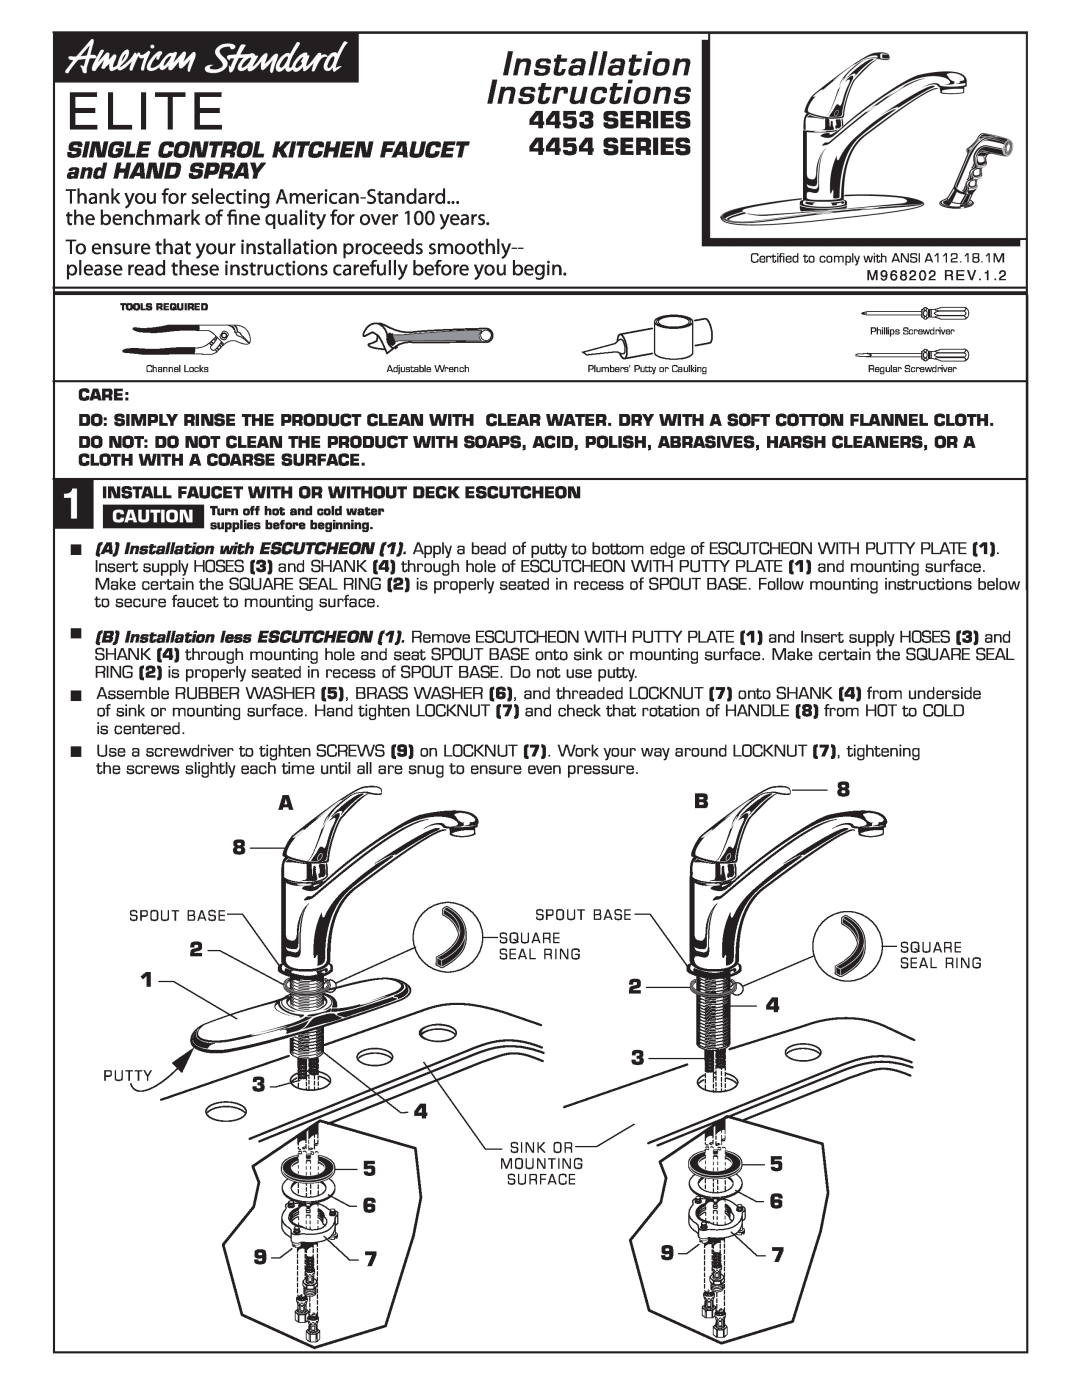 American Standard 4454 installation instructions Series, Elite, Installation, Instructions, Single Control Kitchen Faucet 